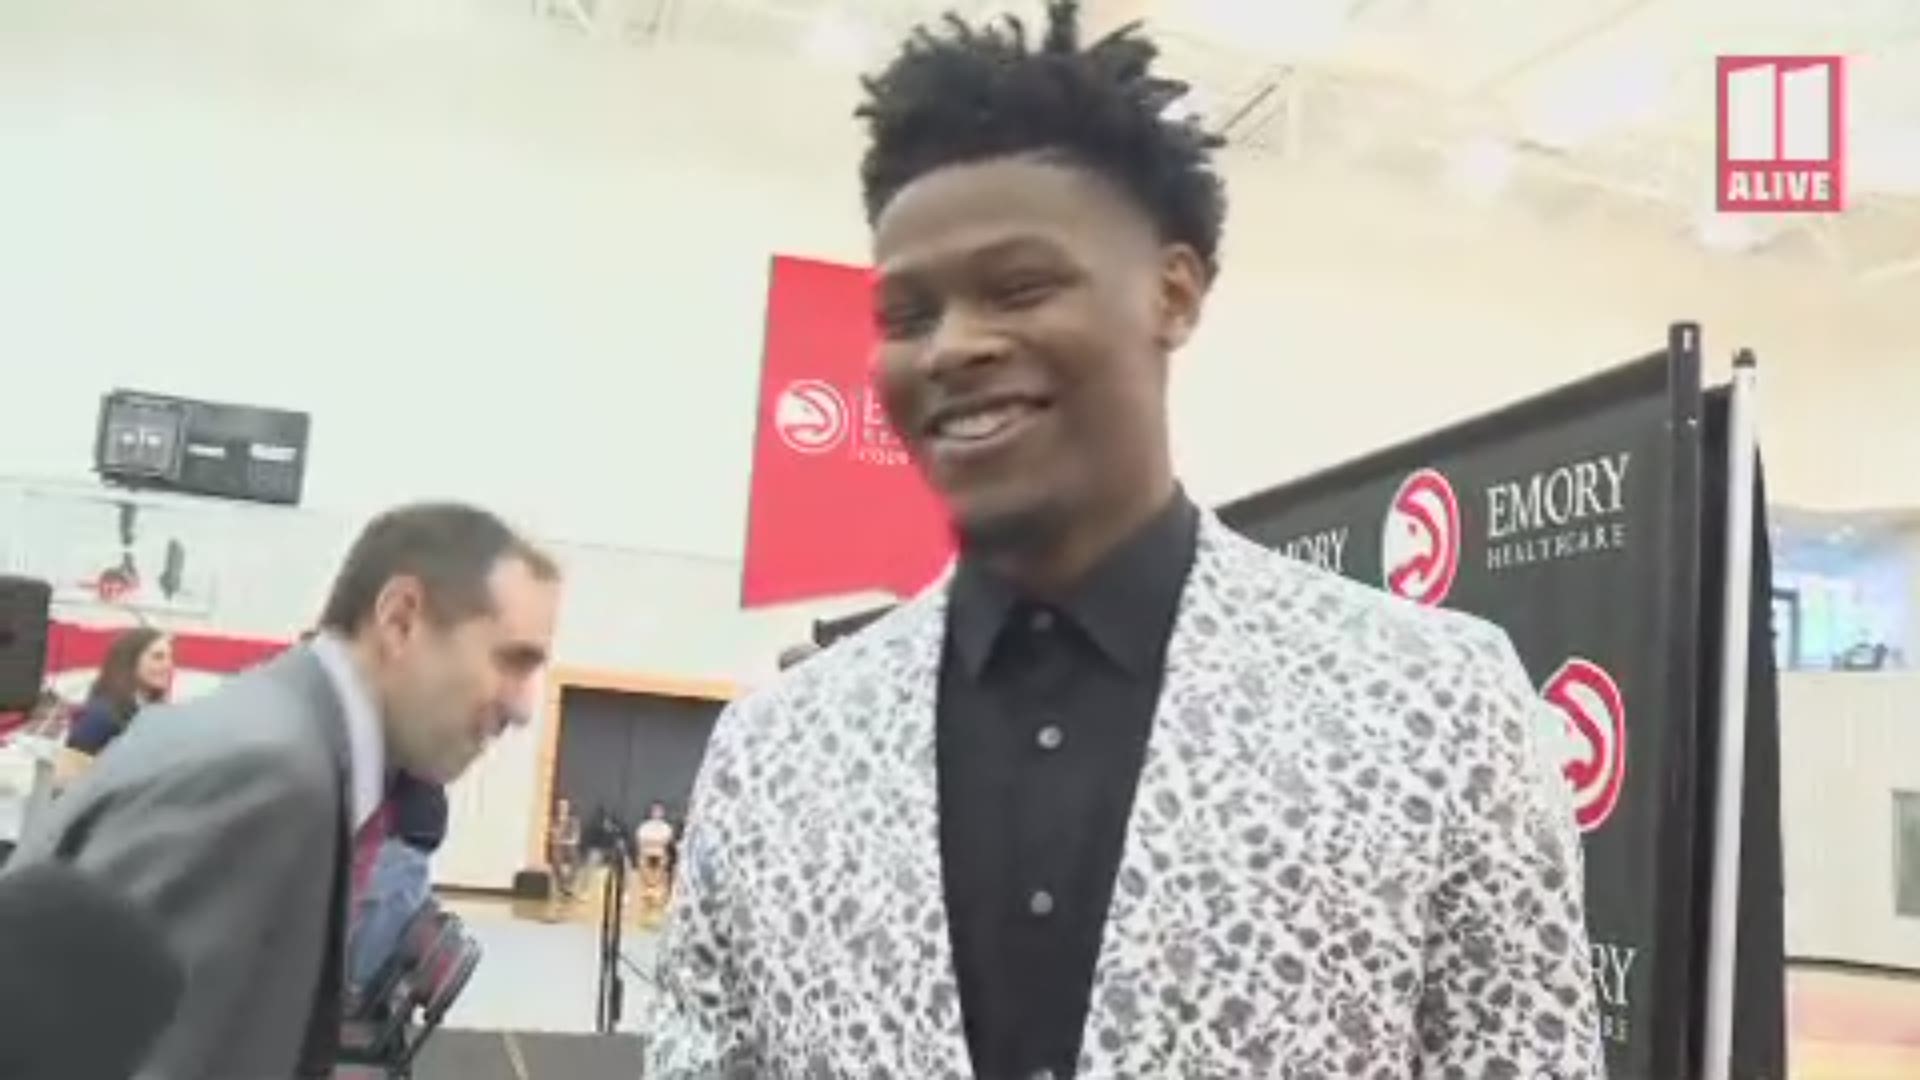 Atlanta made Cam Reddish the 10th pick in last Thursday's NBA Draft. On Monday, they introduced him to media and fans.